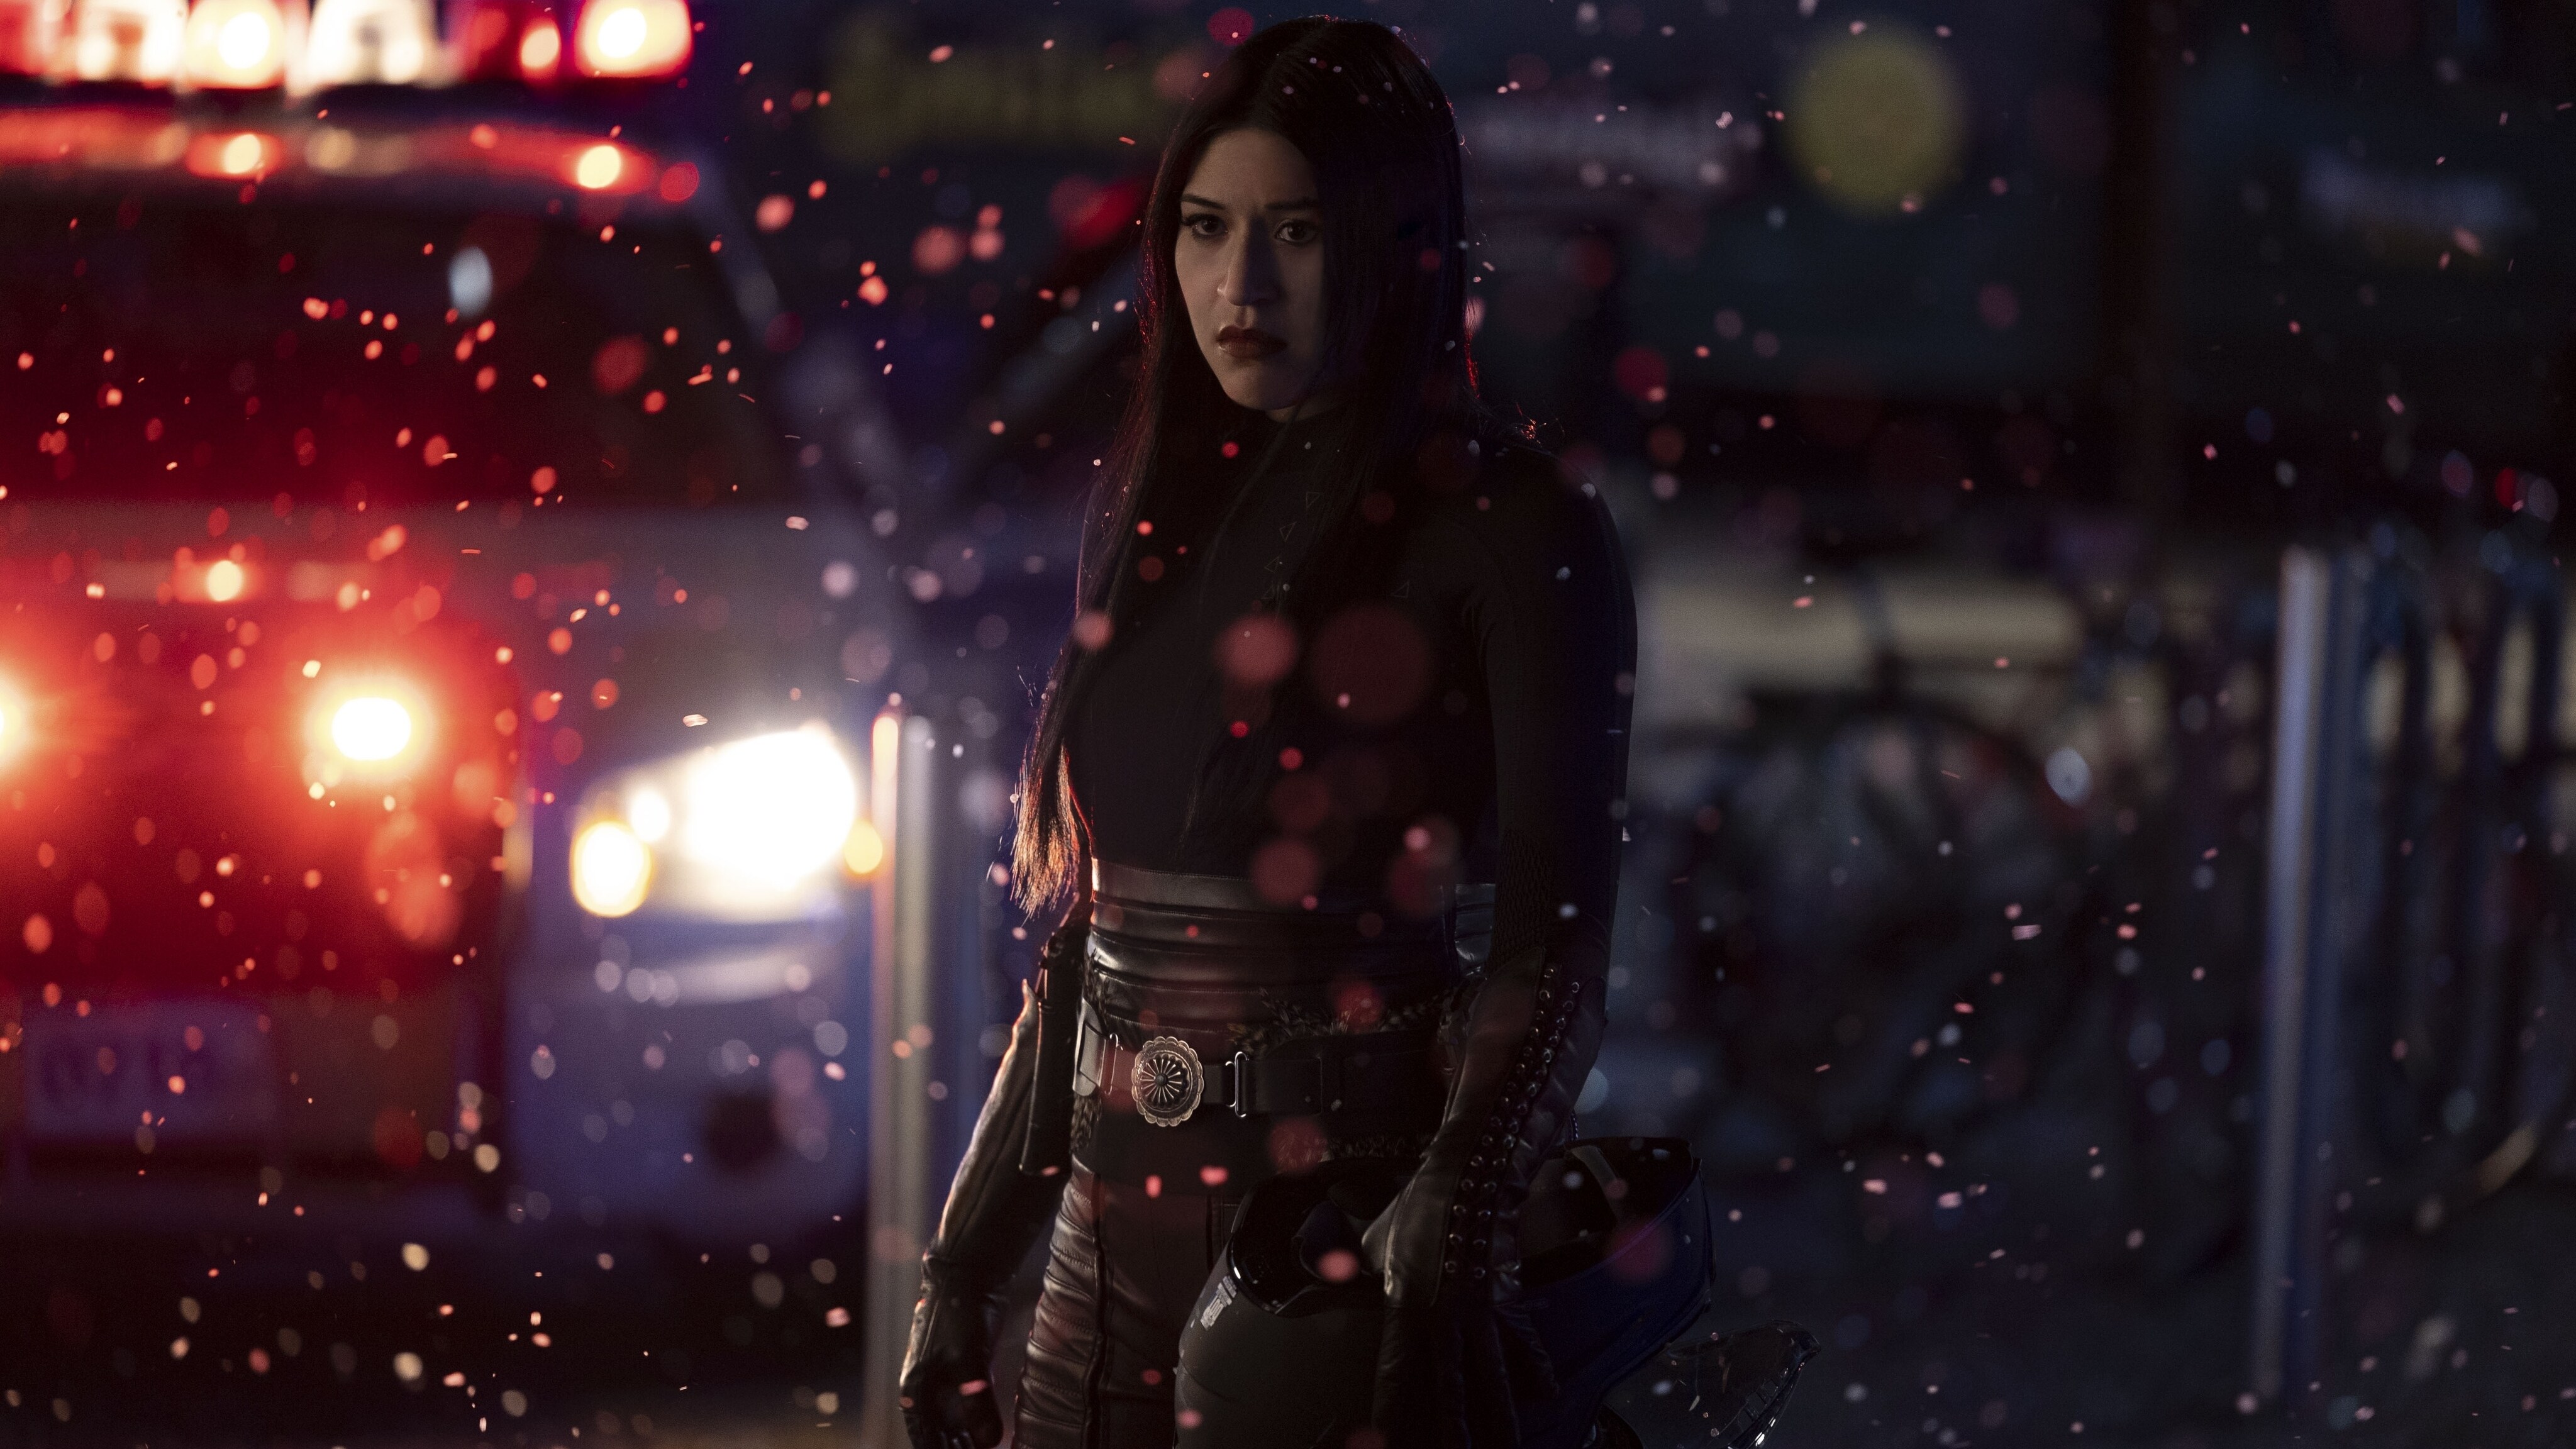 Alaqua Cox as Maya Lopez in Marvel Studios' HAWKEYE. Photo by Chuck Zlotnick. ©Marvel Studios 2021. All Rights Reserved.